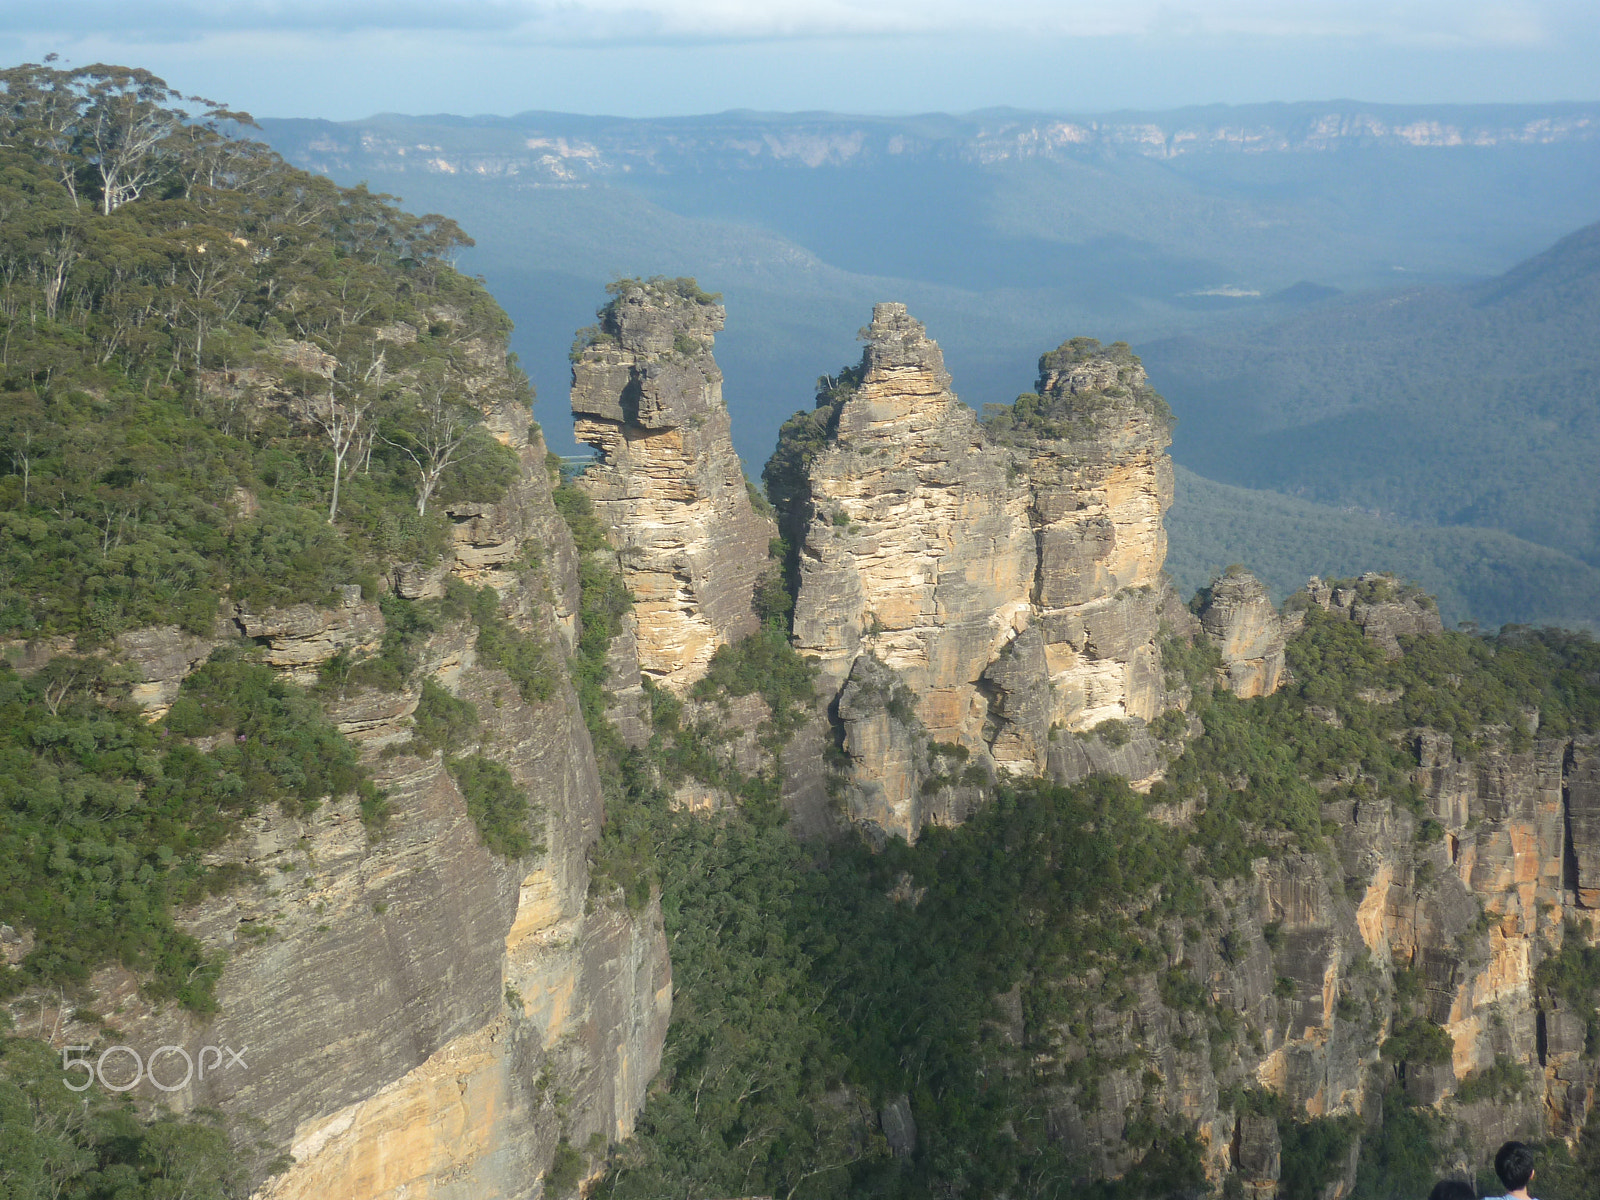 Panasonic DMC-FS7 sample photo. The three sisters in the blue mountains. photography